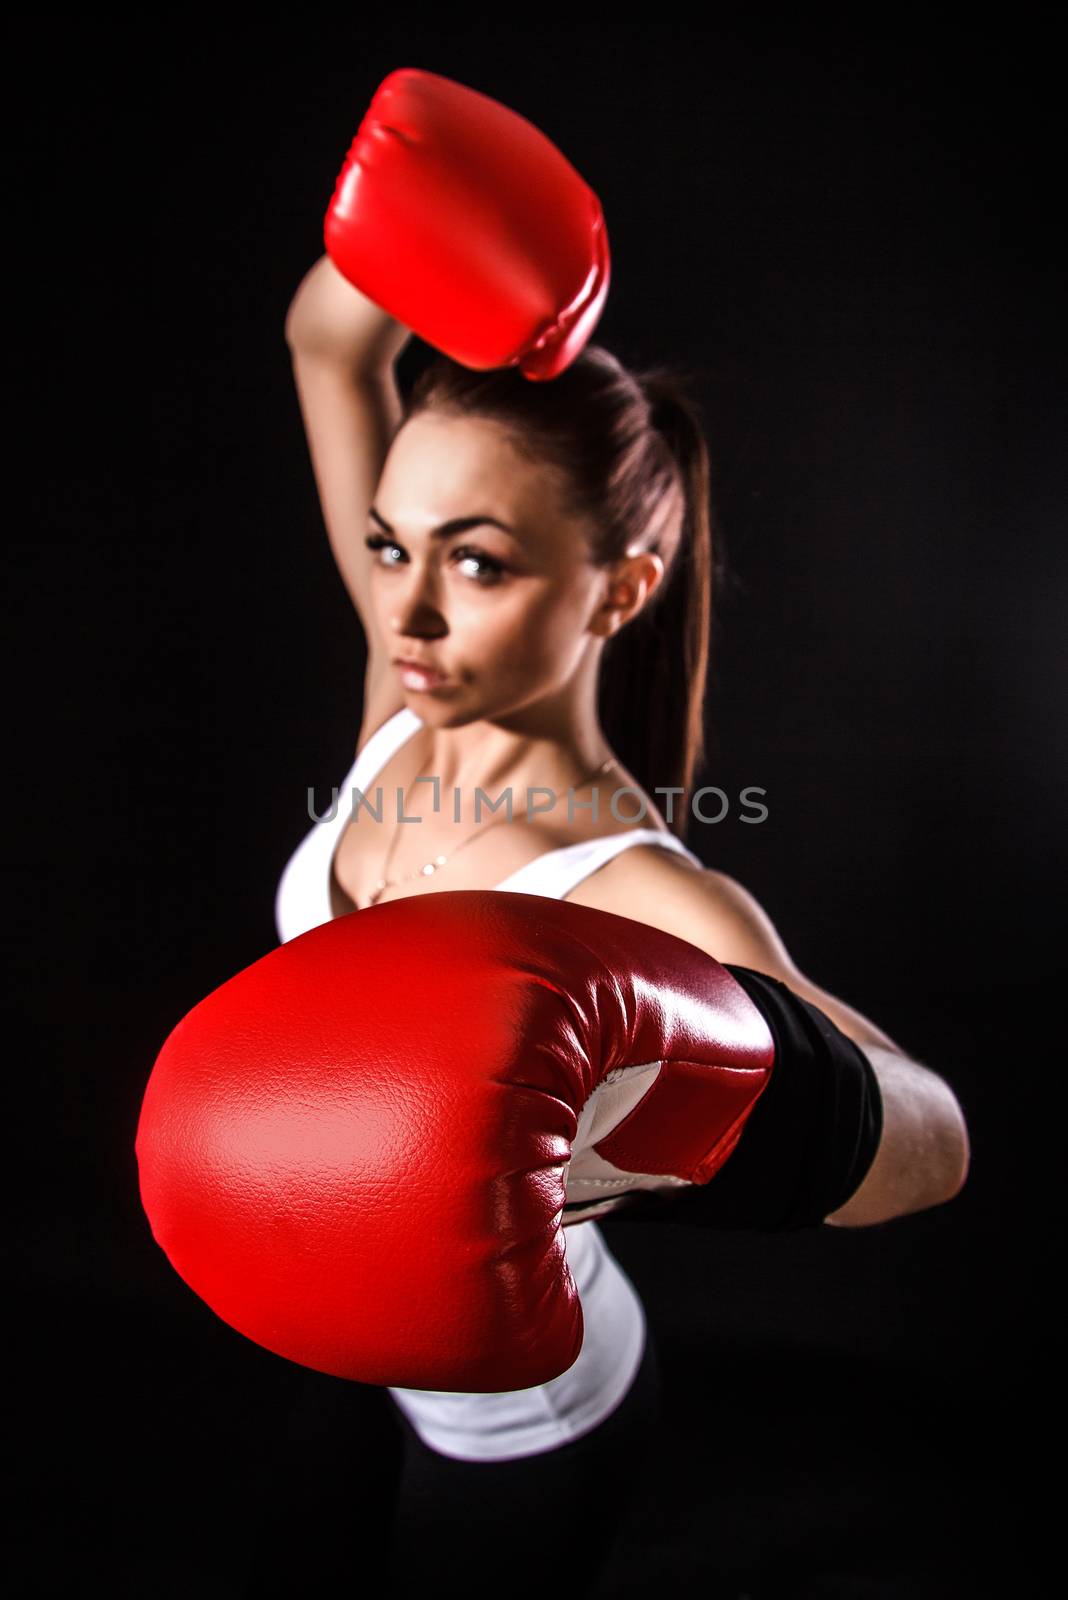 Beautiful young woman in a red boxing gloves over black background (focus is on the glove)